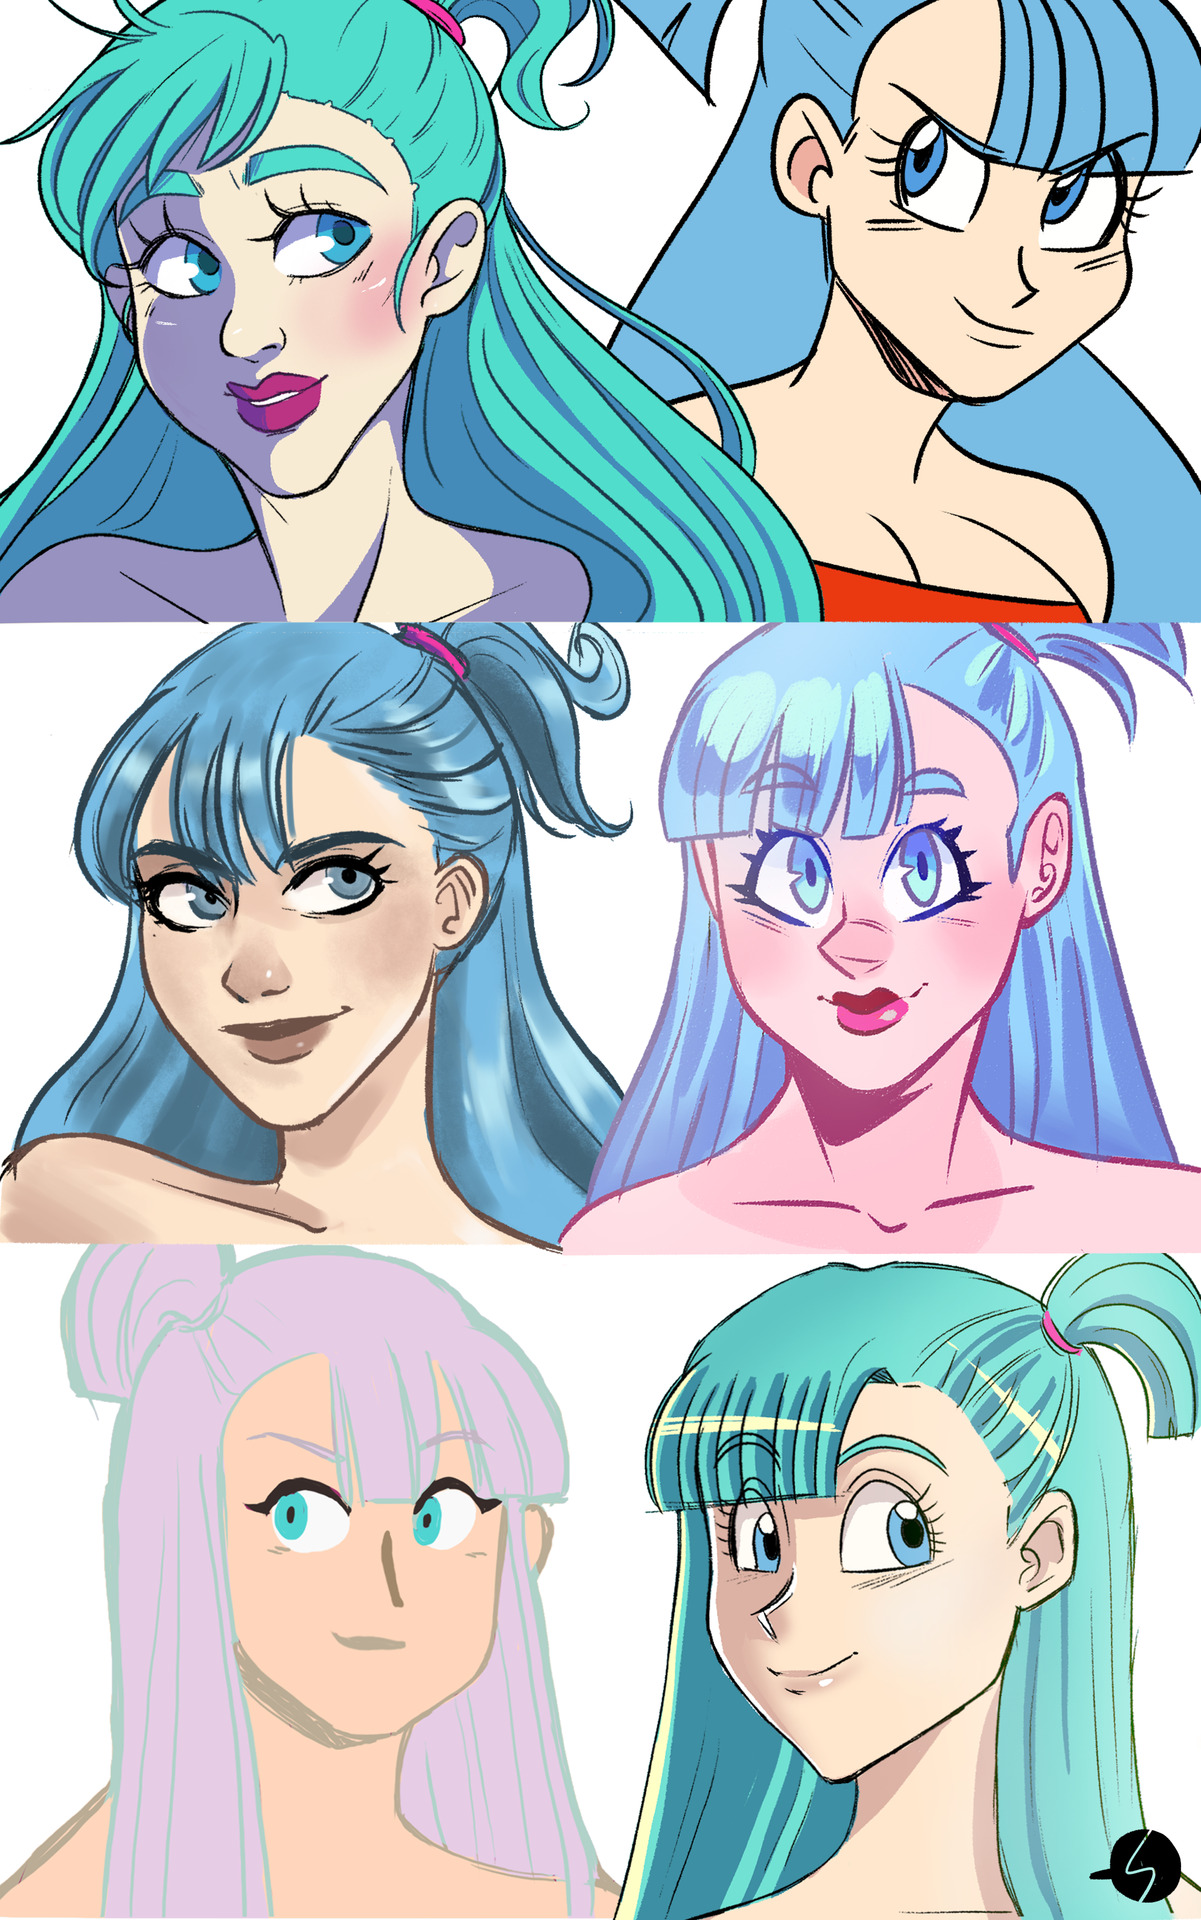 shageku: An Art Style Challenge to thanks these wonderful artists who keep helping